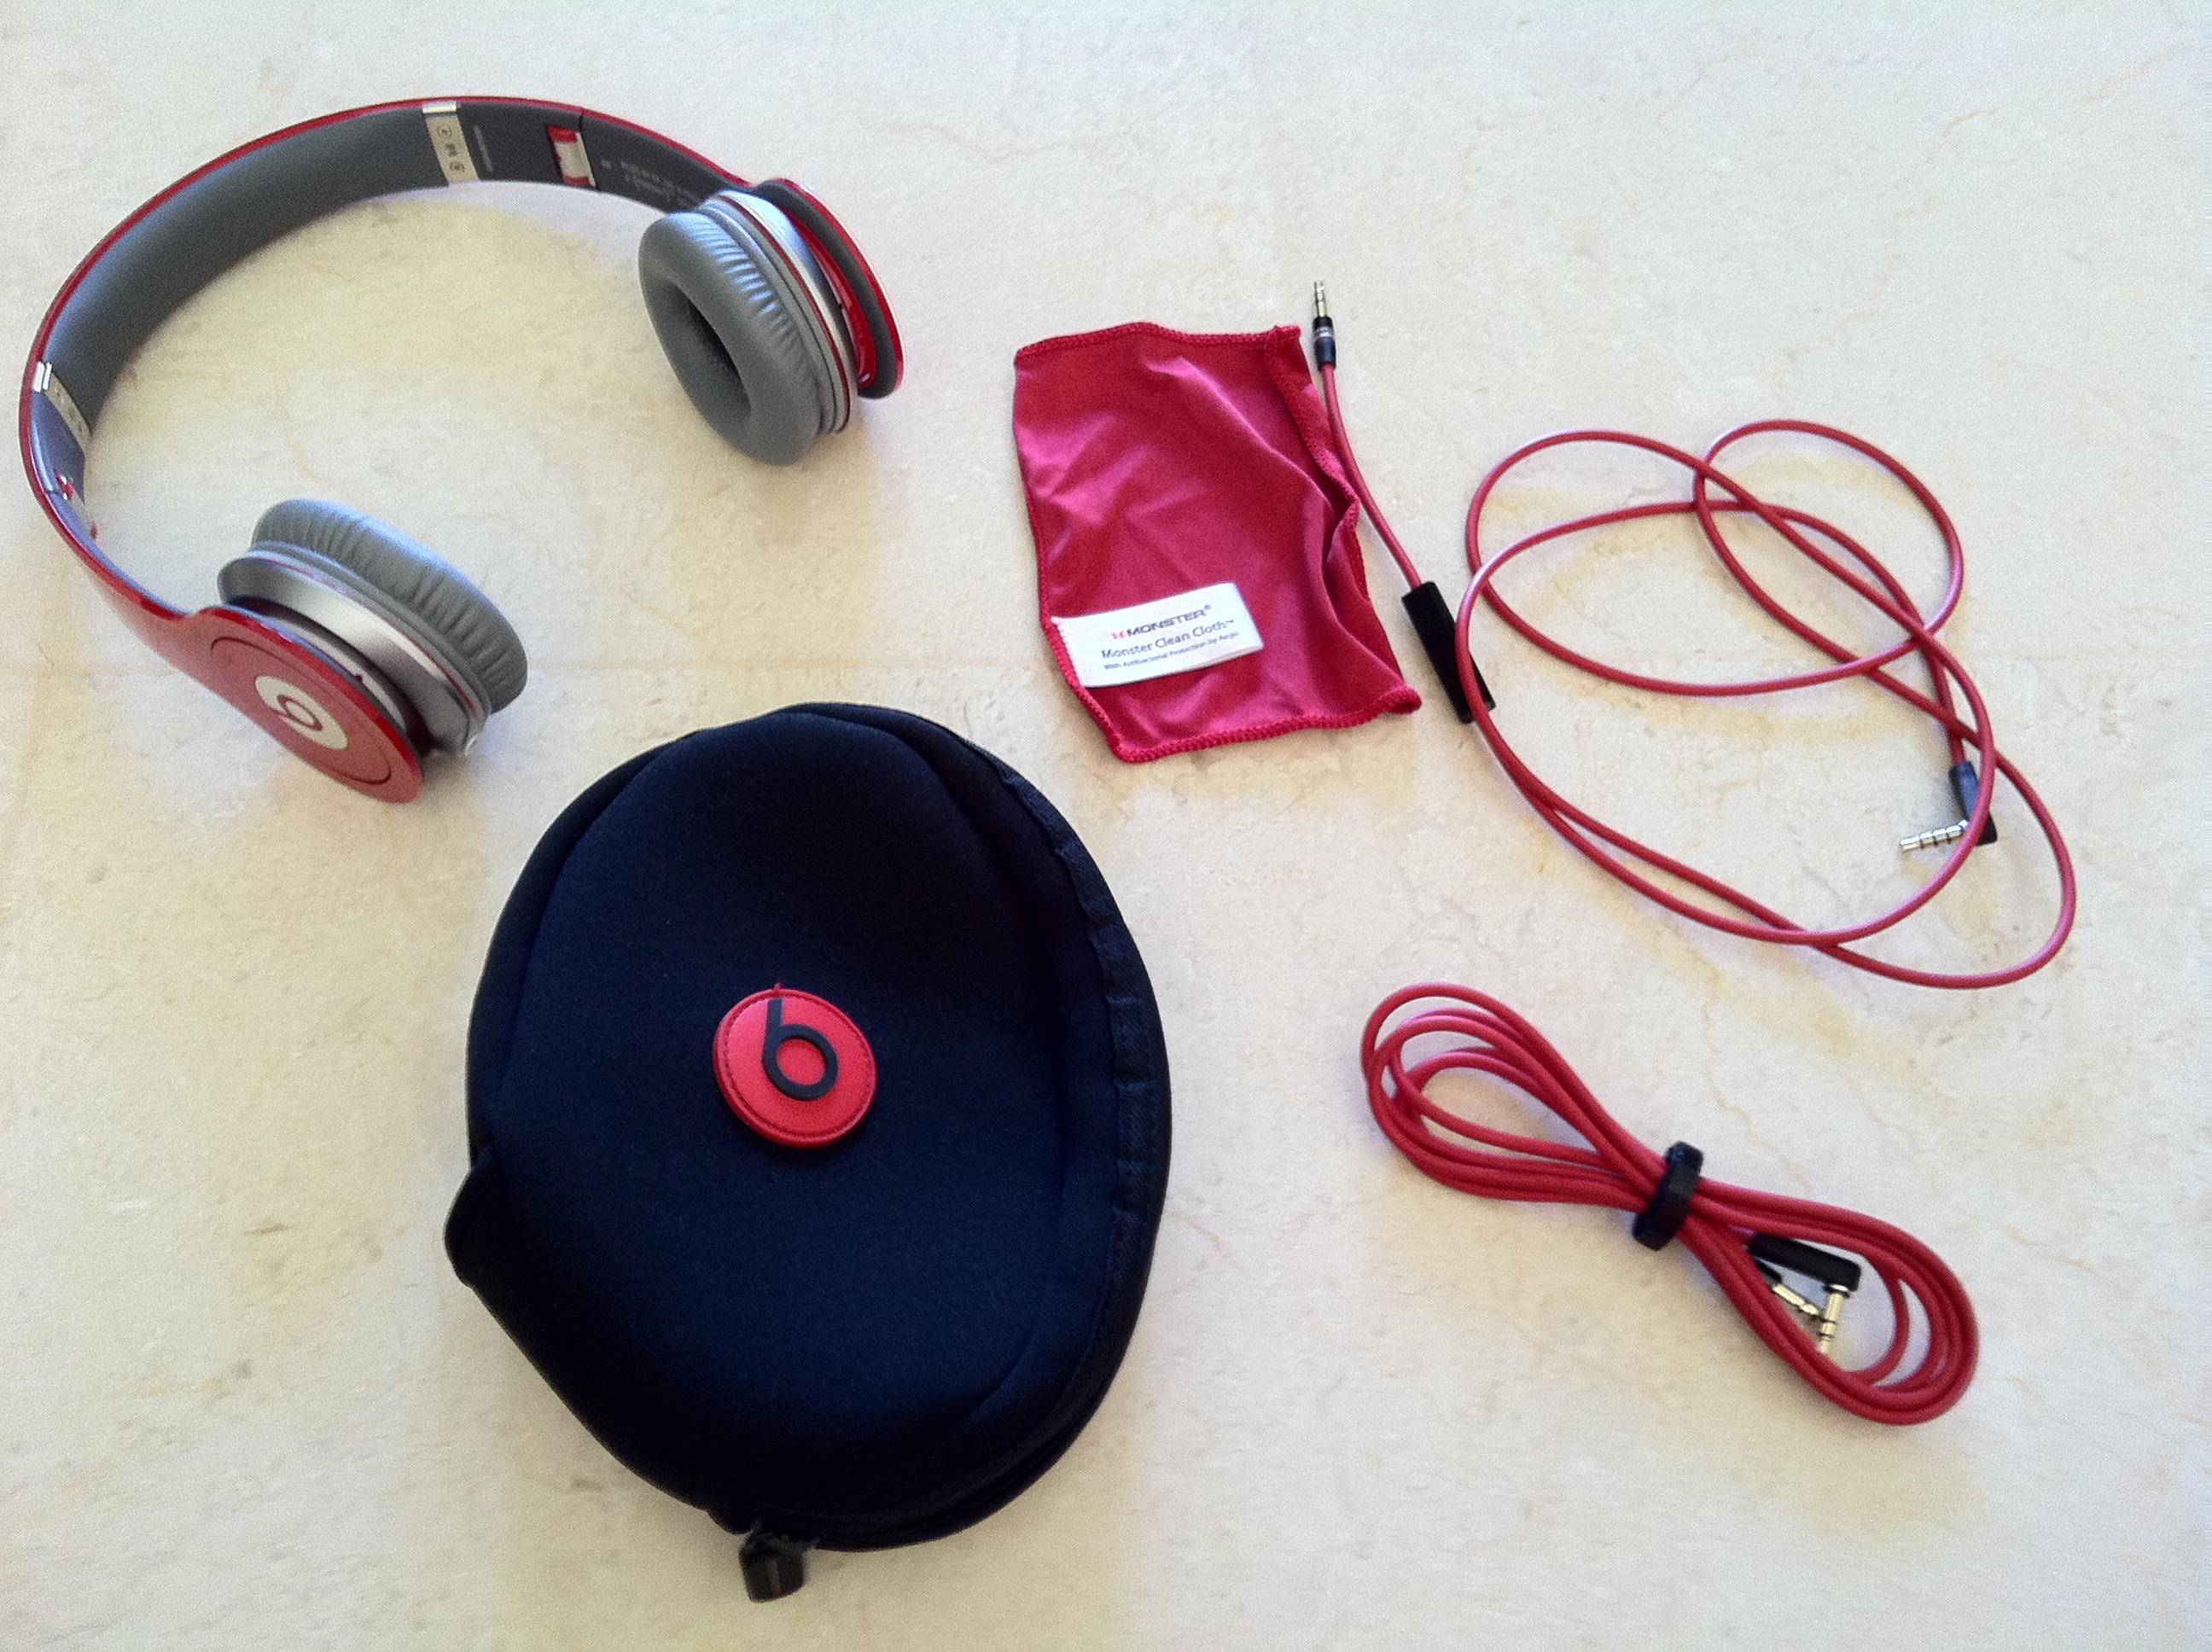 beats by dre solo hd special edition red